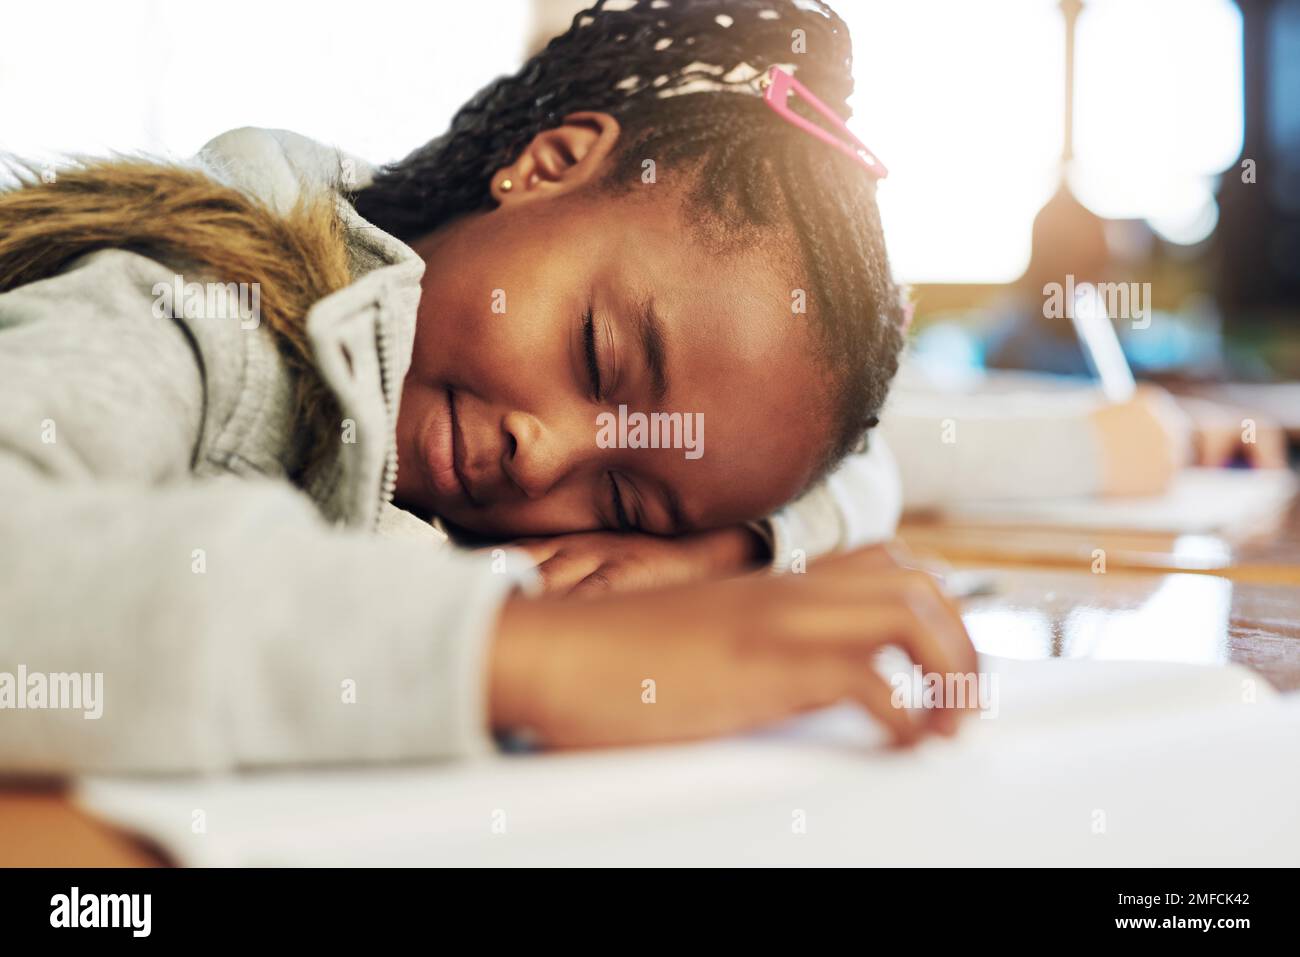 Nap time for the little wiz kid. an elementary school girl sleeping on her desk in class. Stock Photo